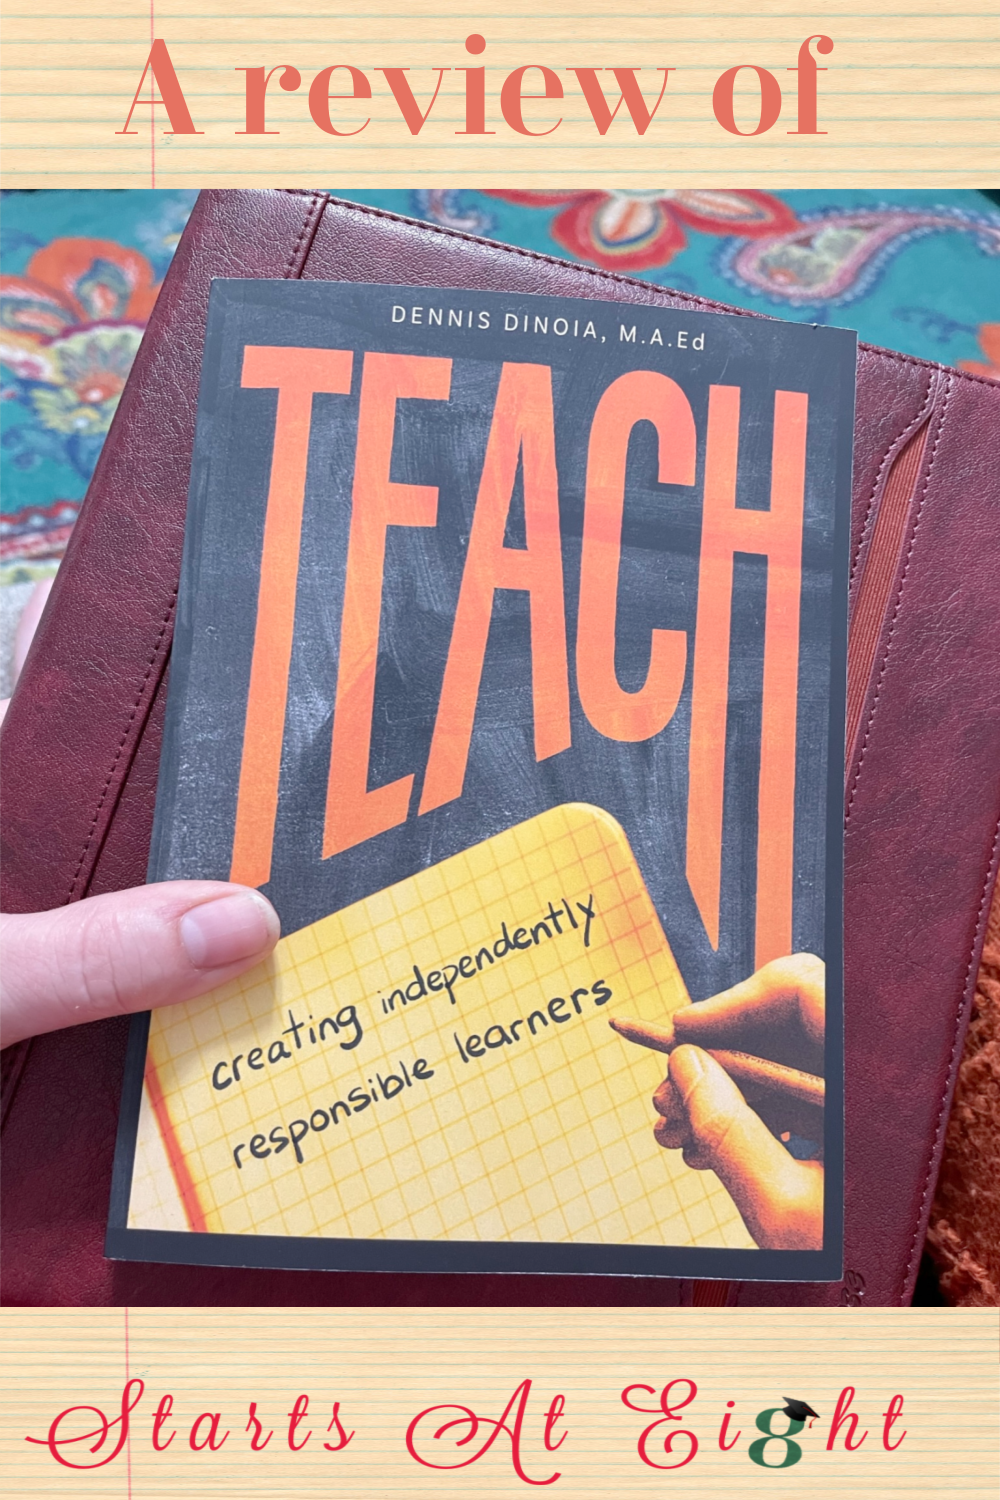 TEACH by Dennis Dinoia is a practical guide for helping parents and teachers teach kids to become independently responsible learners.